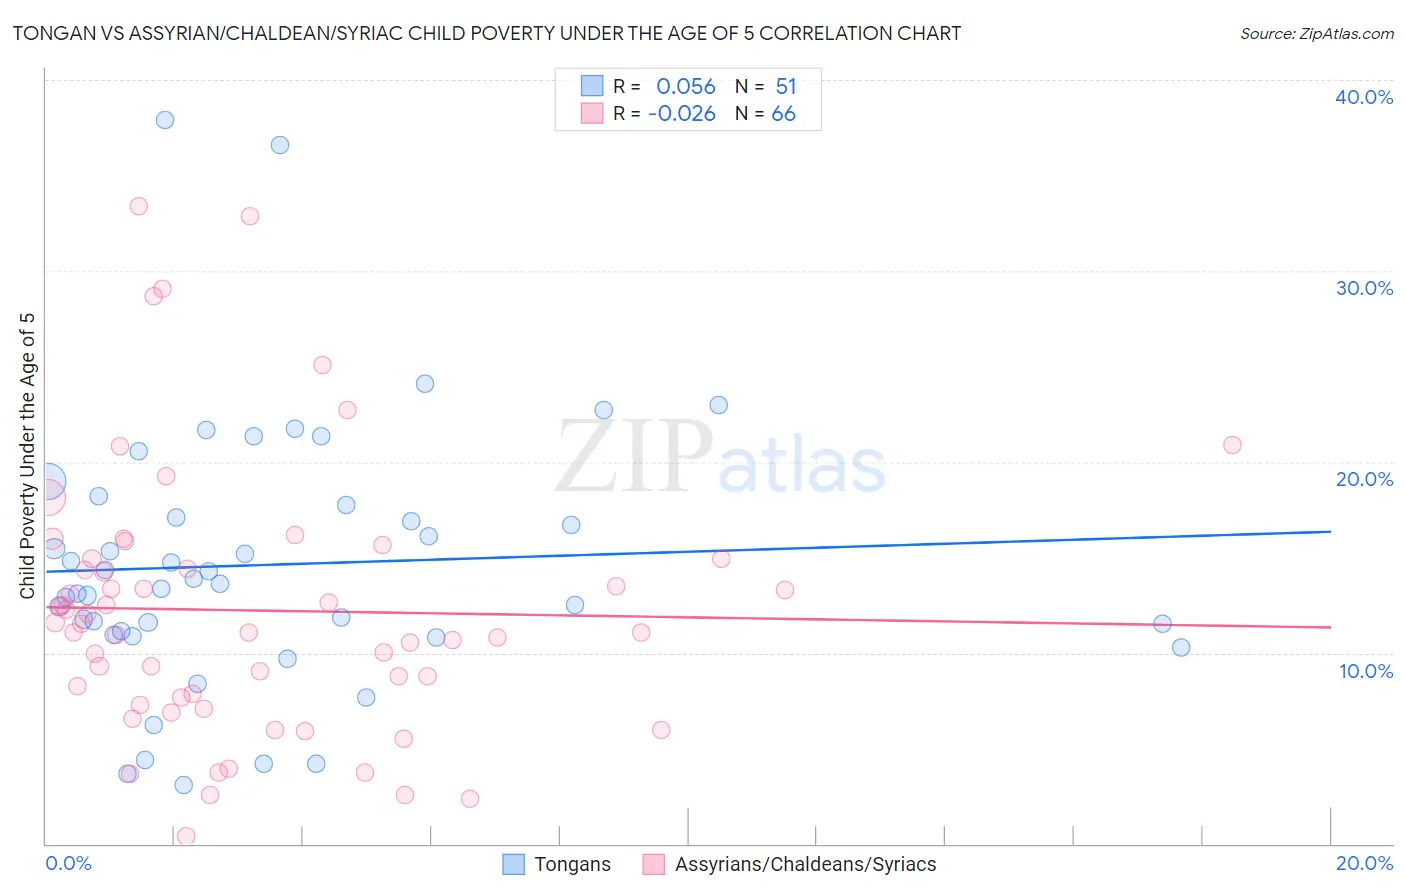 Tongan vs Assyrian/Chaldean/Syriac Child Poverty Under the Age of 5